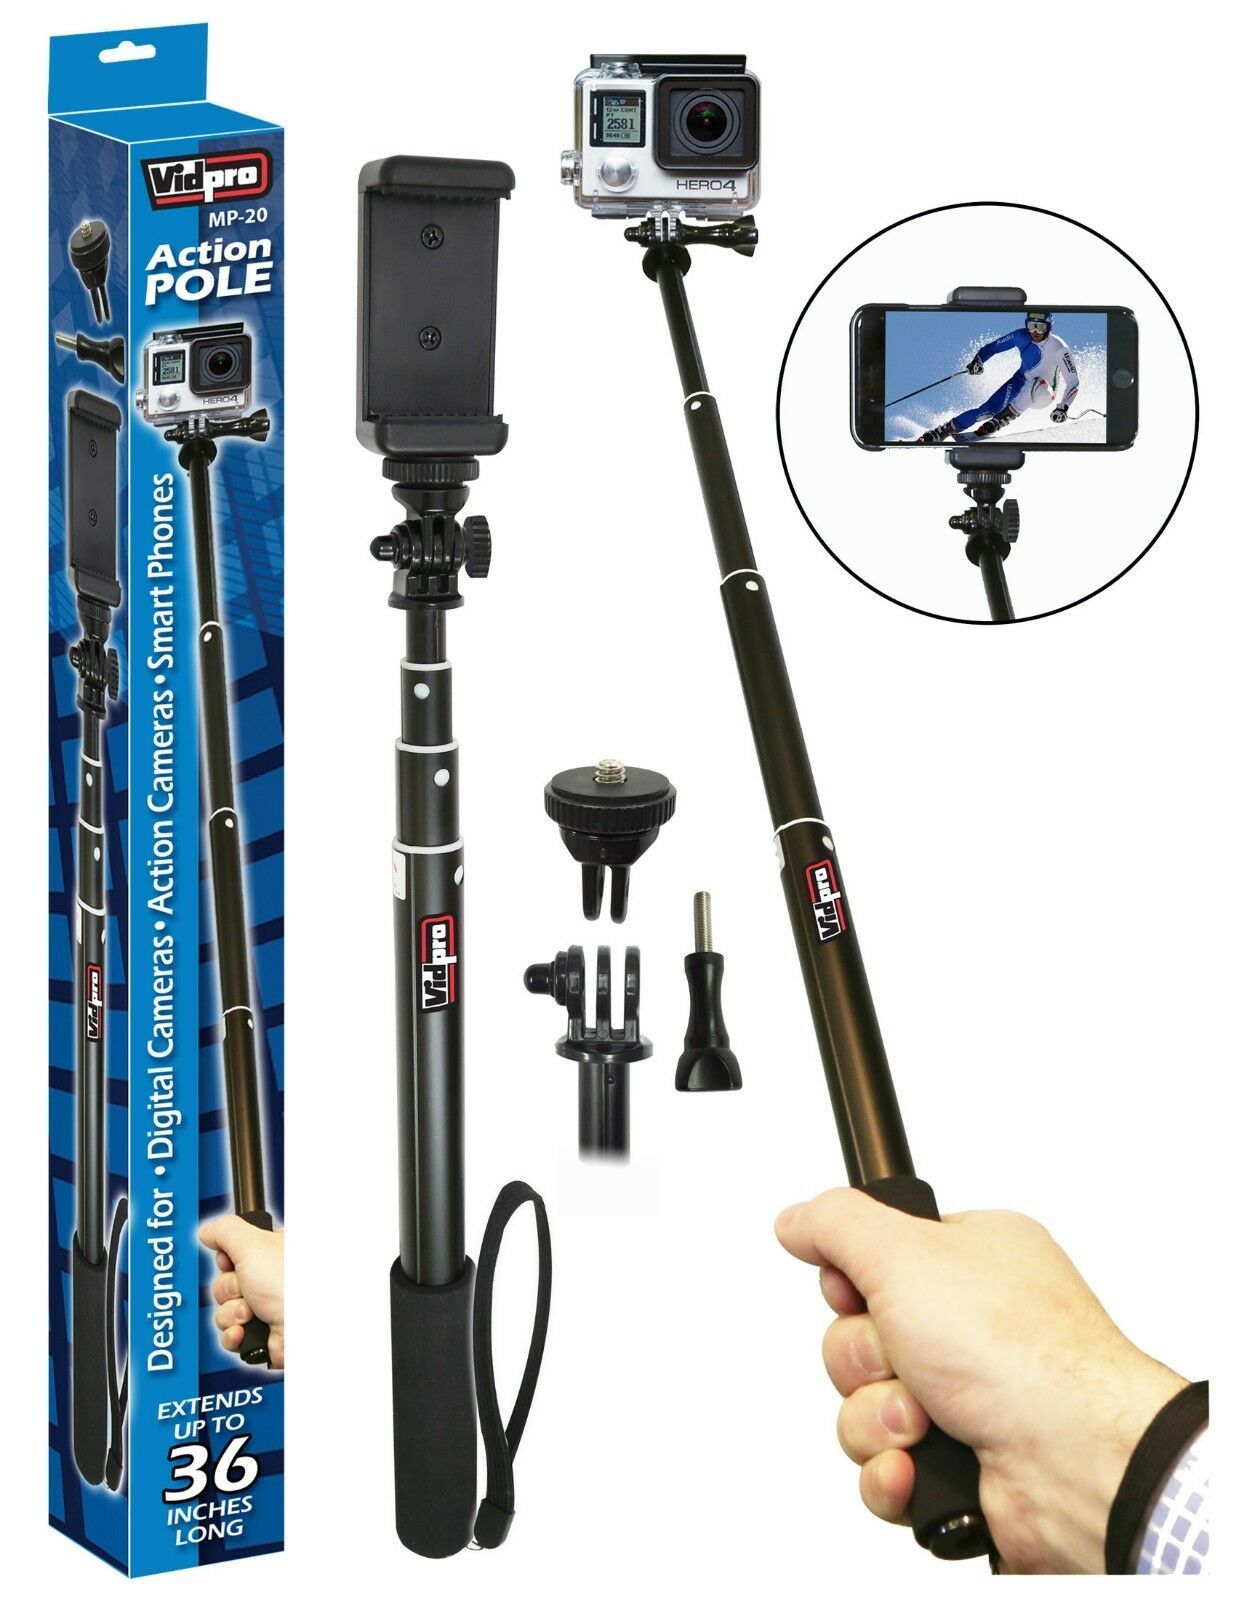 Vidpro MP-20 Action Pole Monopod Stick up to 36" for Digital Cameras, Gopro Hero - $22.46